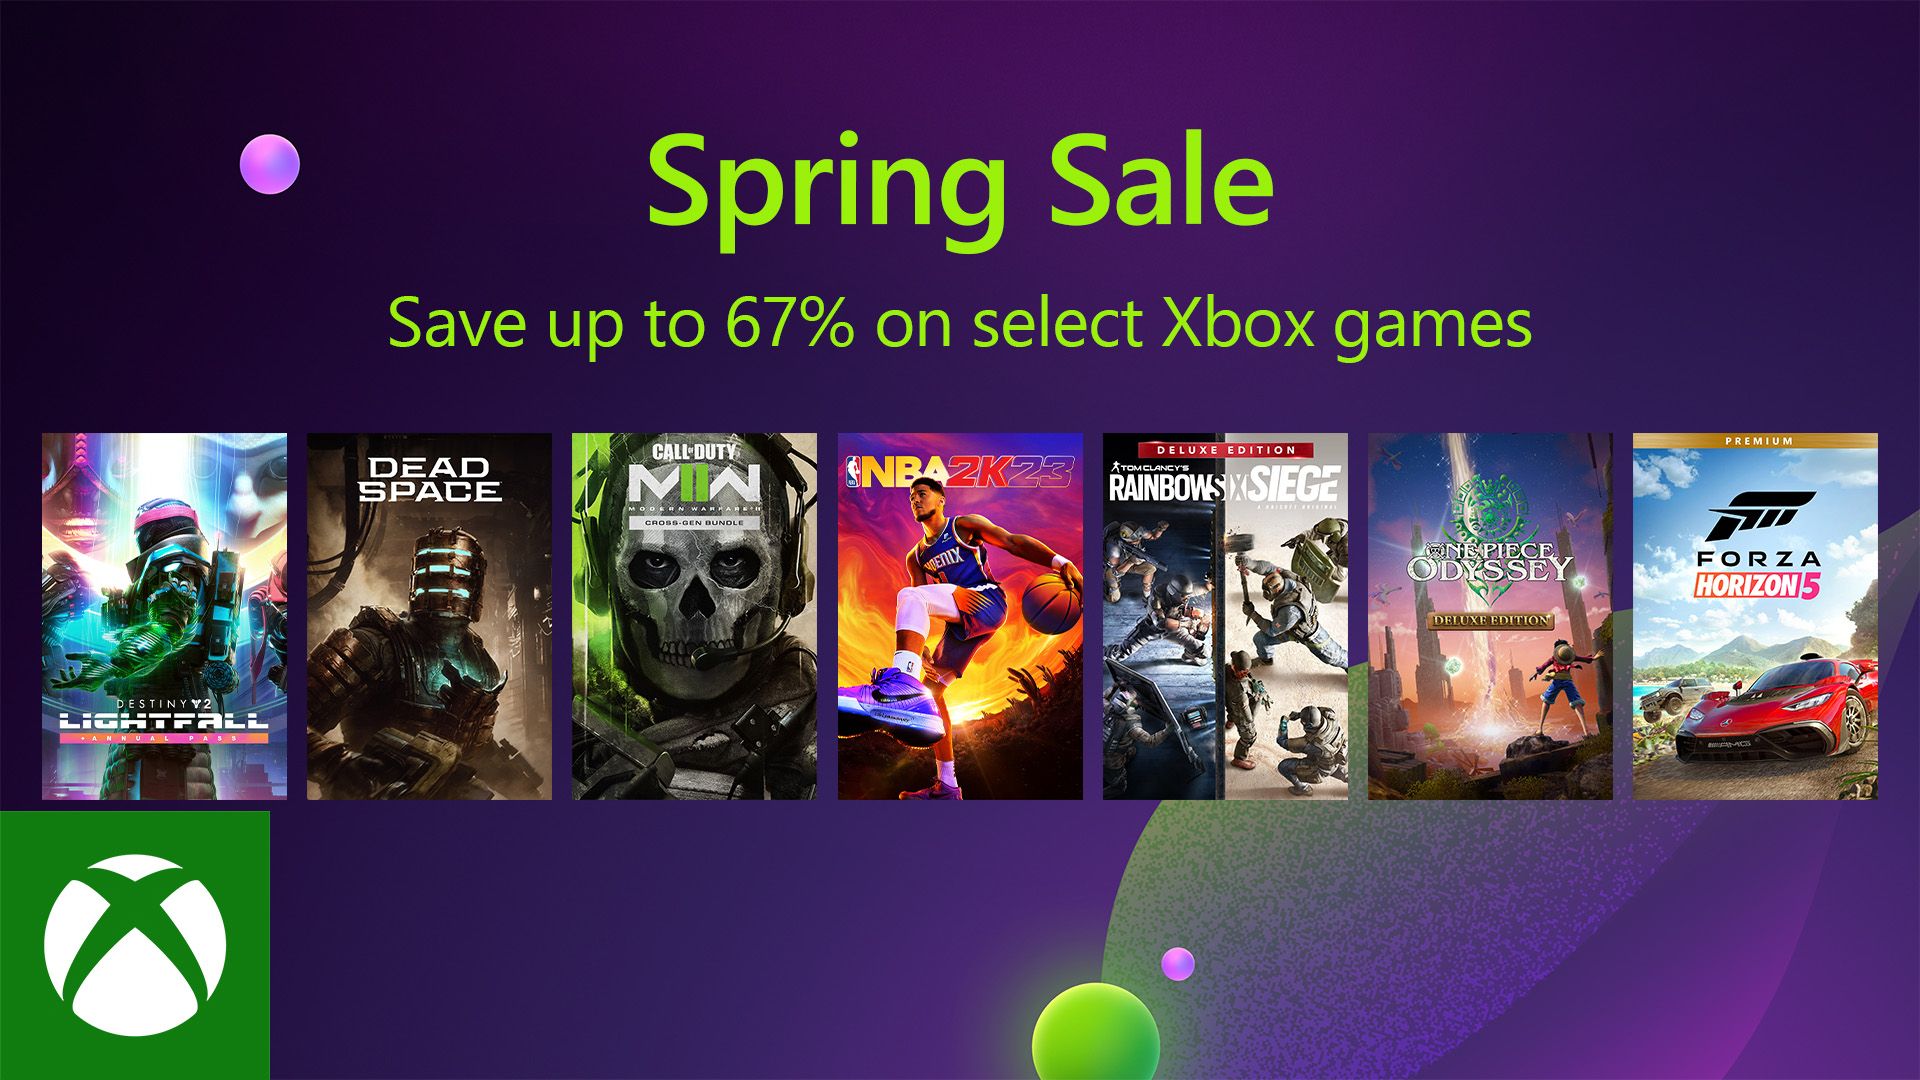 This Week’s Deals with Gold and Spotlight Sale, Plus the Spring Sale